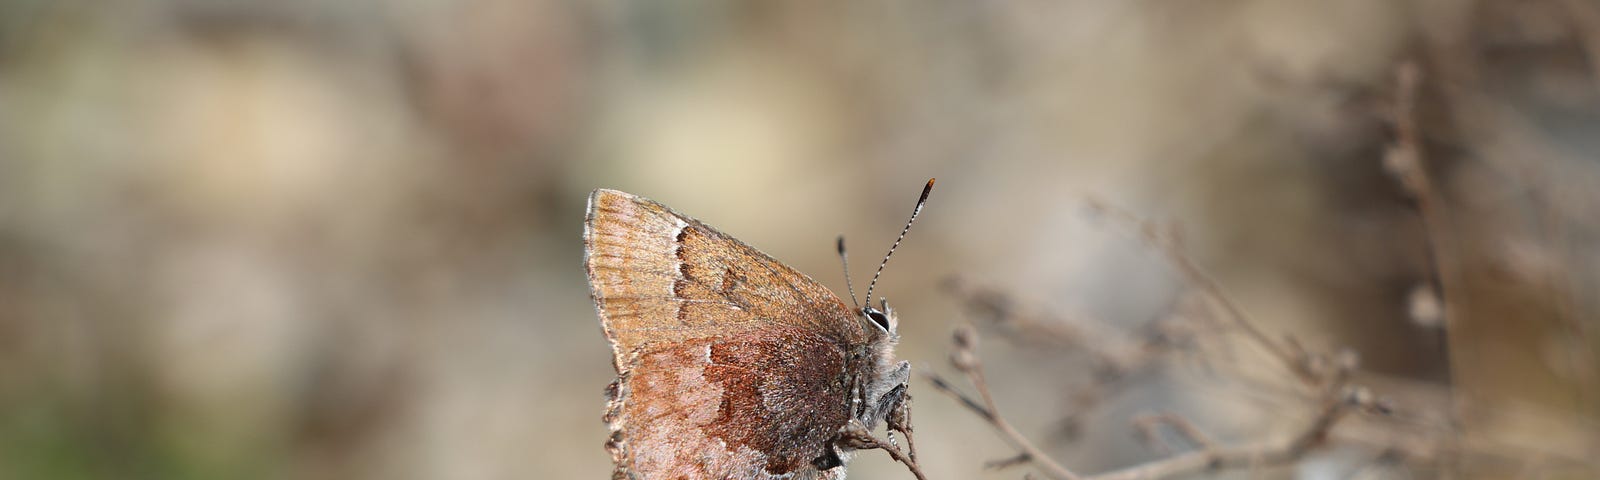 A silvery brown butterfly perches on plant